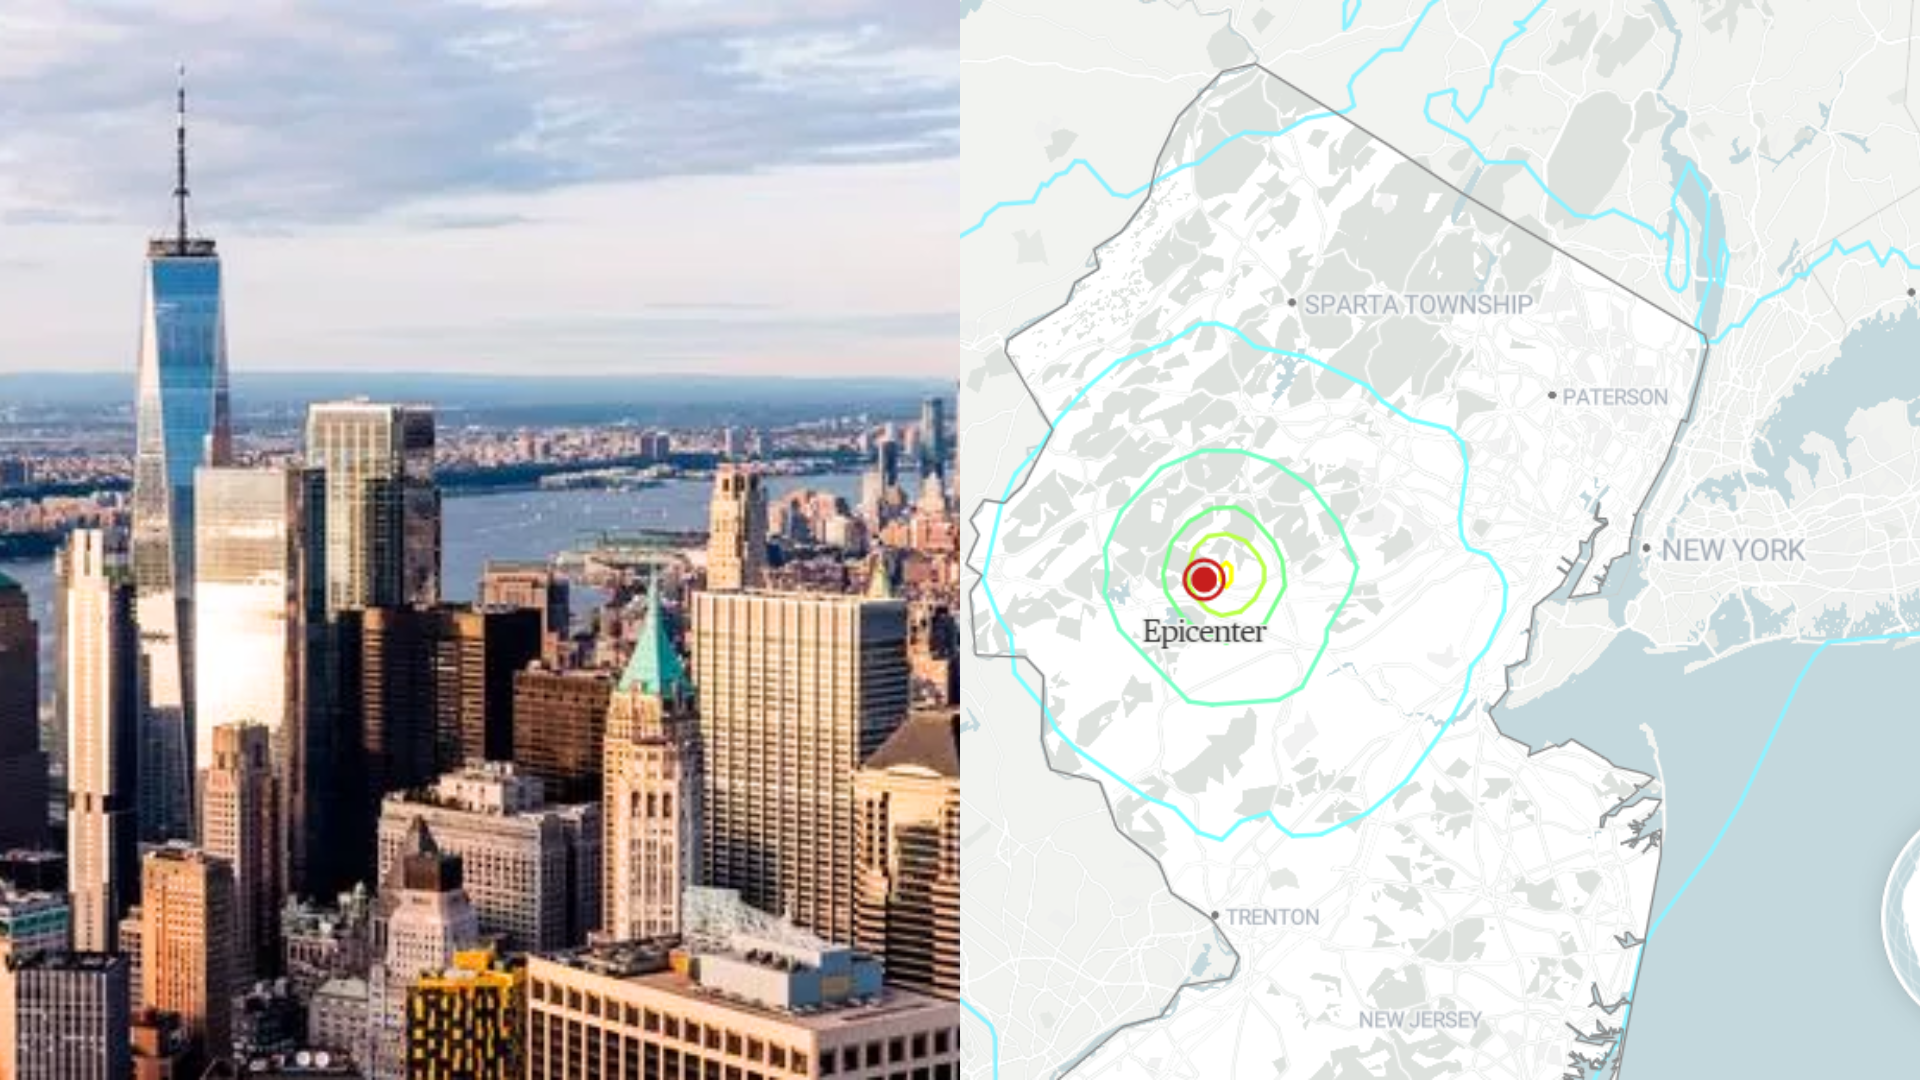 New York Witnesses Second Earthquake Of 4.0 Hours After 4.8 Magnitude Tremors Leaves The City Shaken